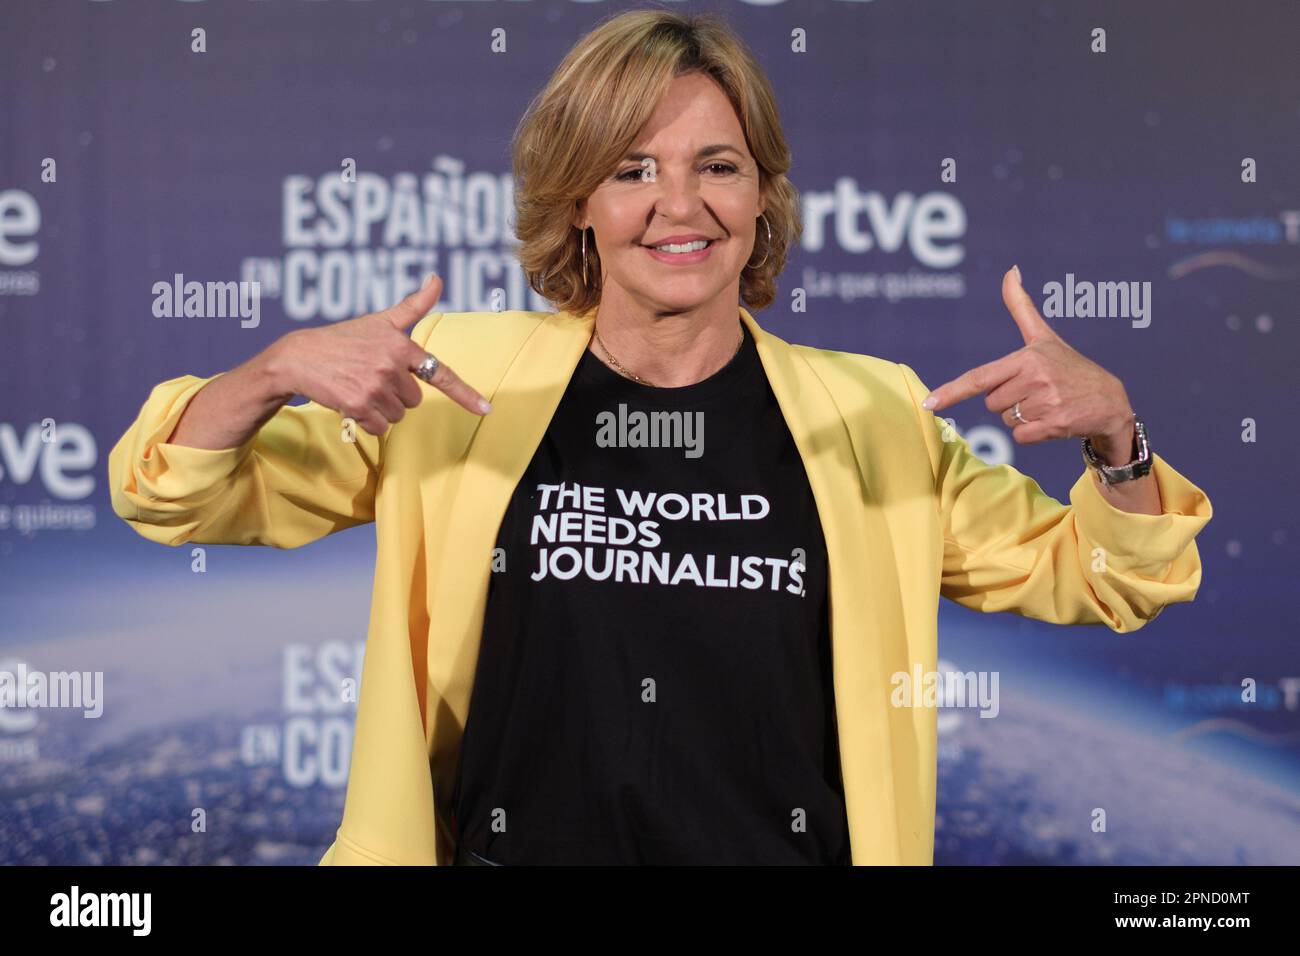 Madrid, Spain. 18th Apr, 2023. Journalist Almudena Ariza poses at the photocall during the presentation of the TV program 'Spaniards in conflict' in Madrid. (Photo by Atilano Garcia/SOPA Images/Sipa USA) Credit: Sipa USA/Alamy Live News Stock Photo